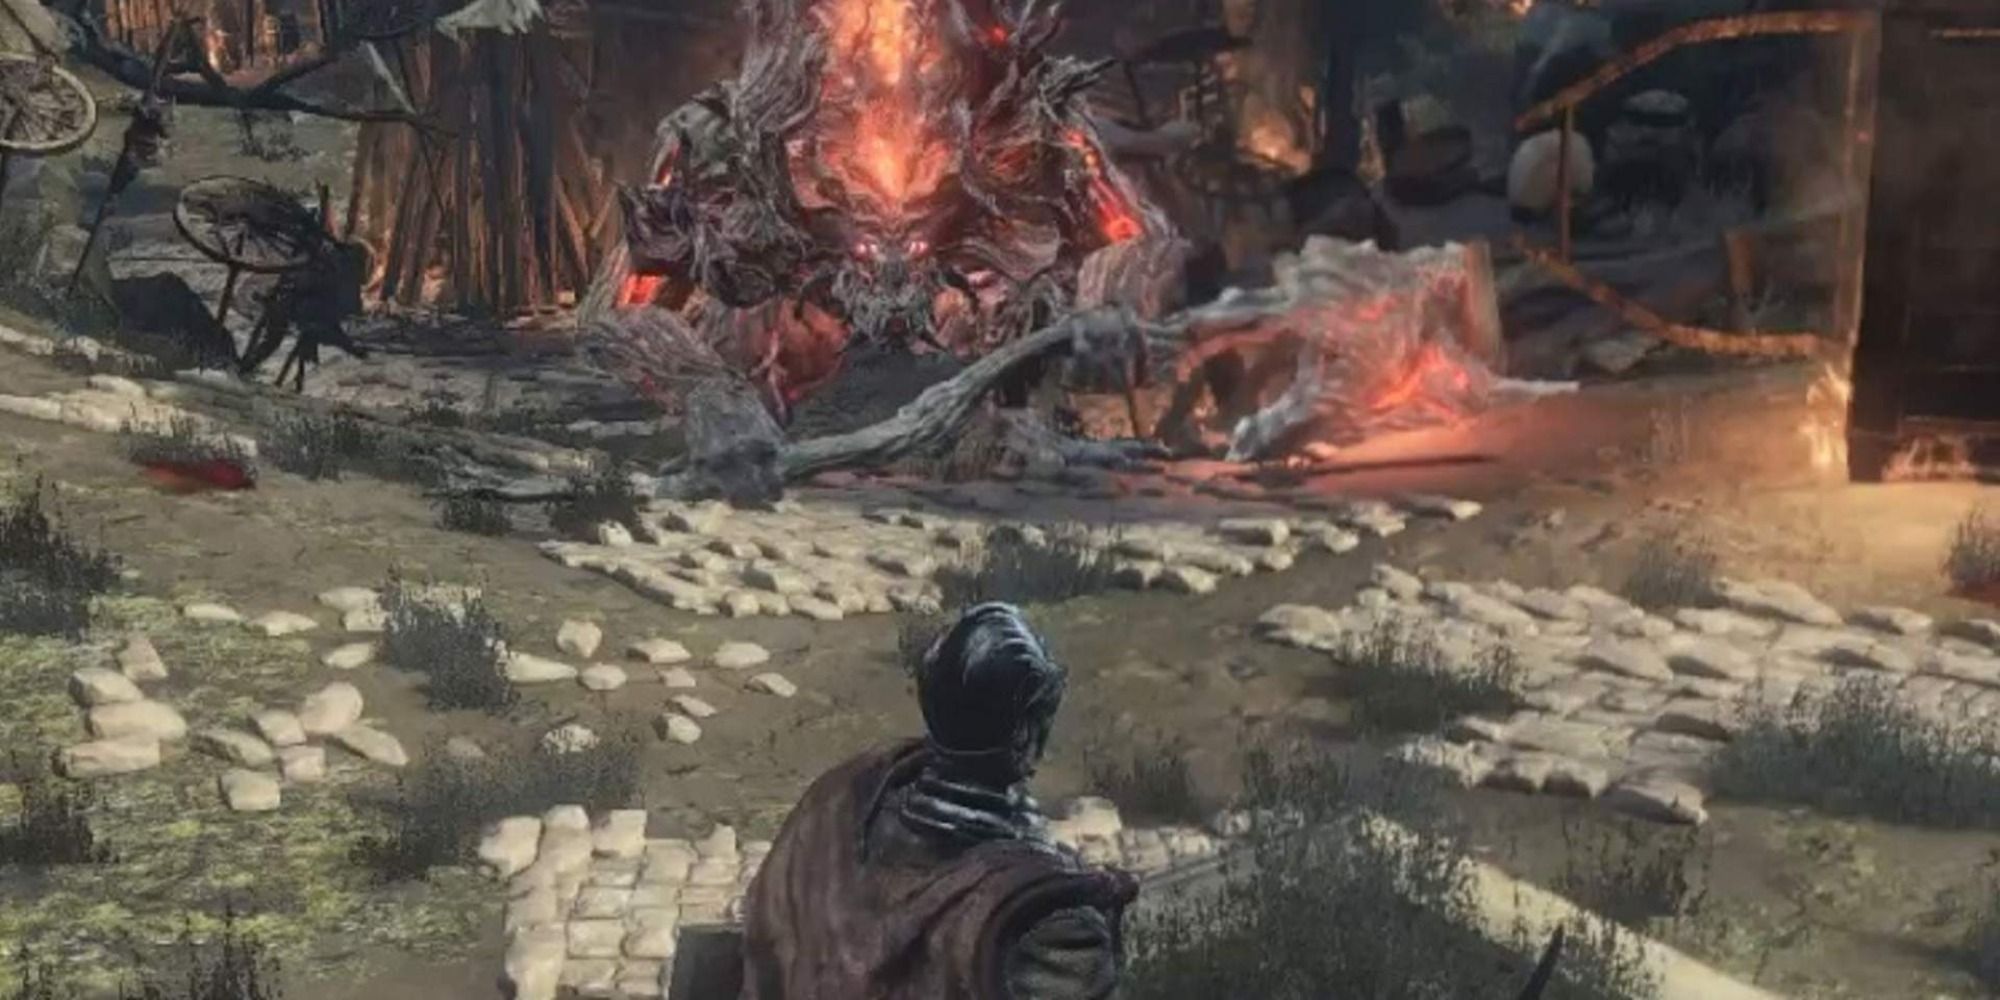 The player look at a fire Demon wielding a giant axe in Dark Souls 3